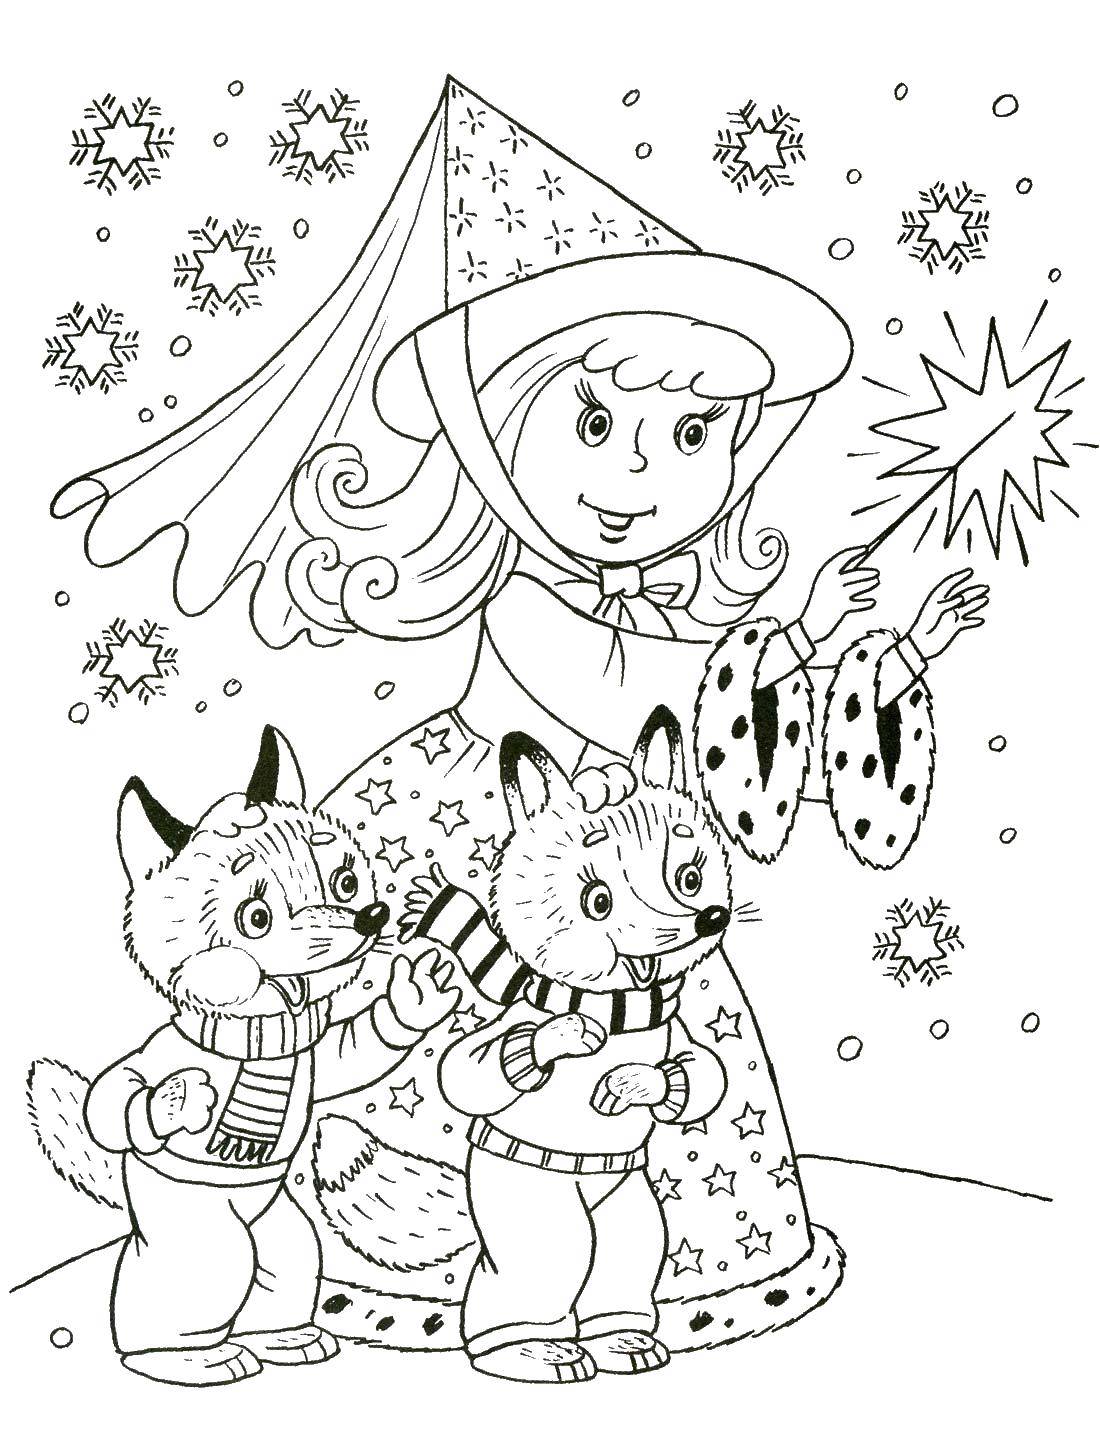 Coloring Chanterelles and snow maiden. Category winter. Tags:  maiden, foxes, snow.